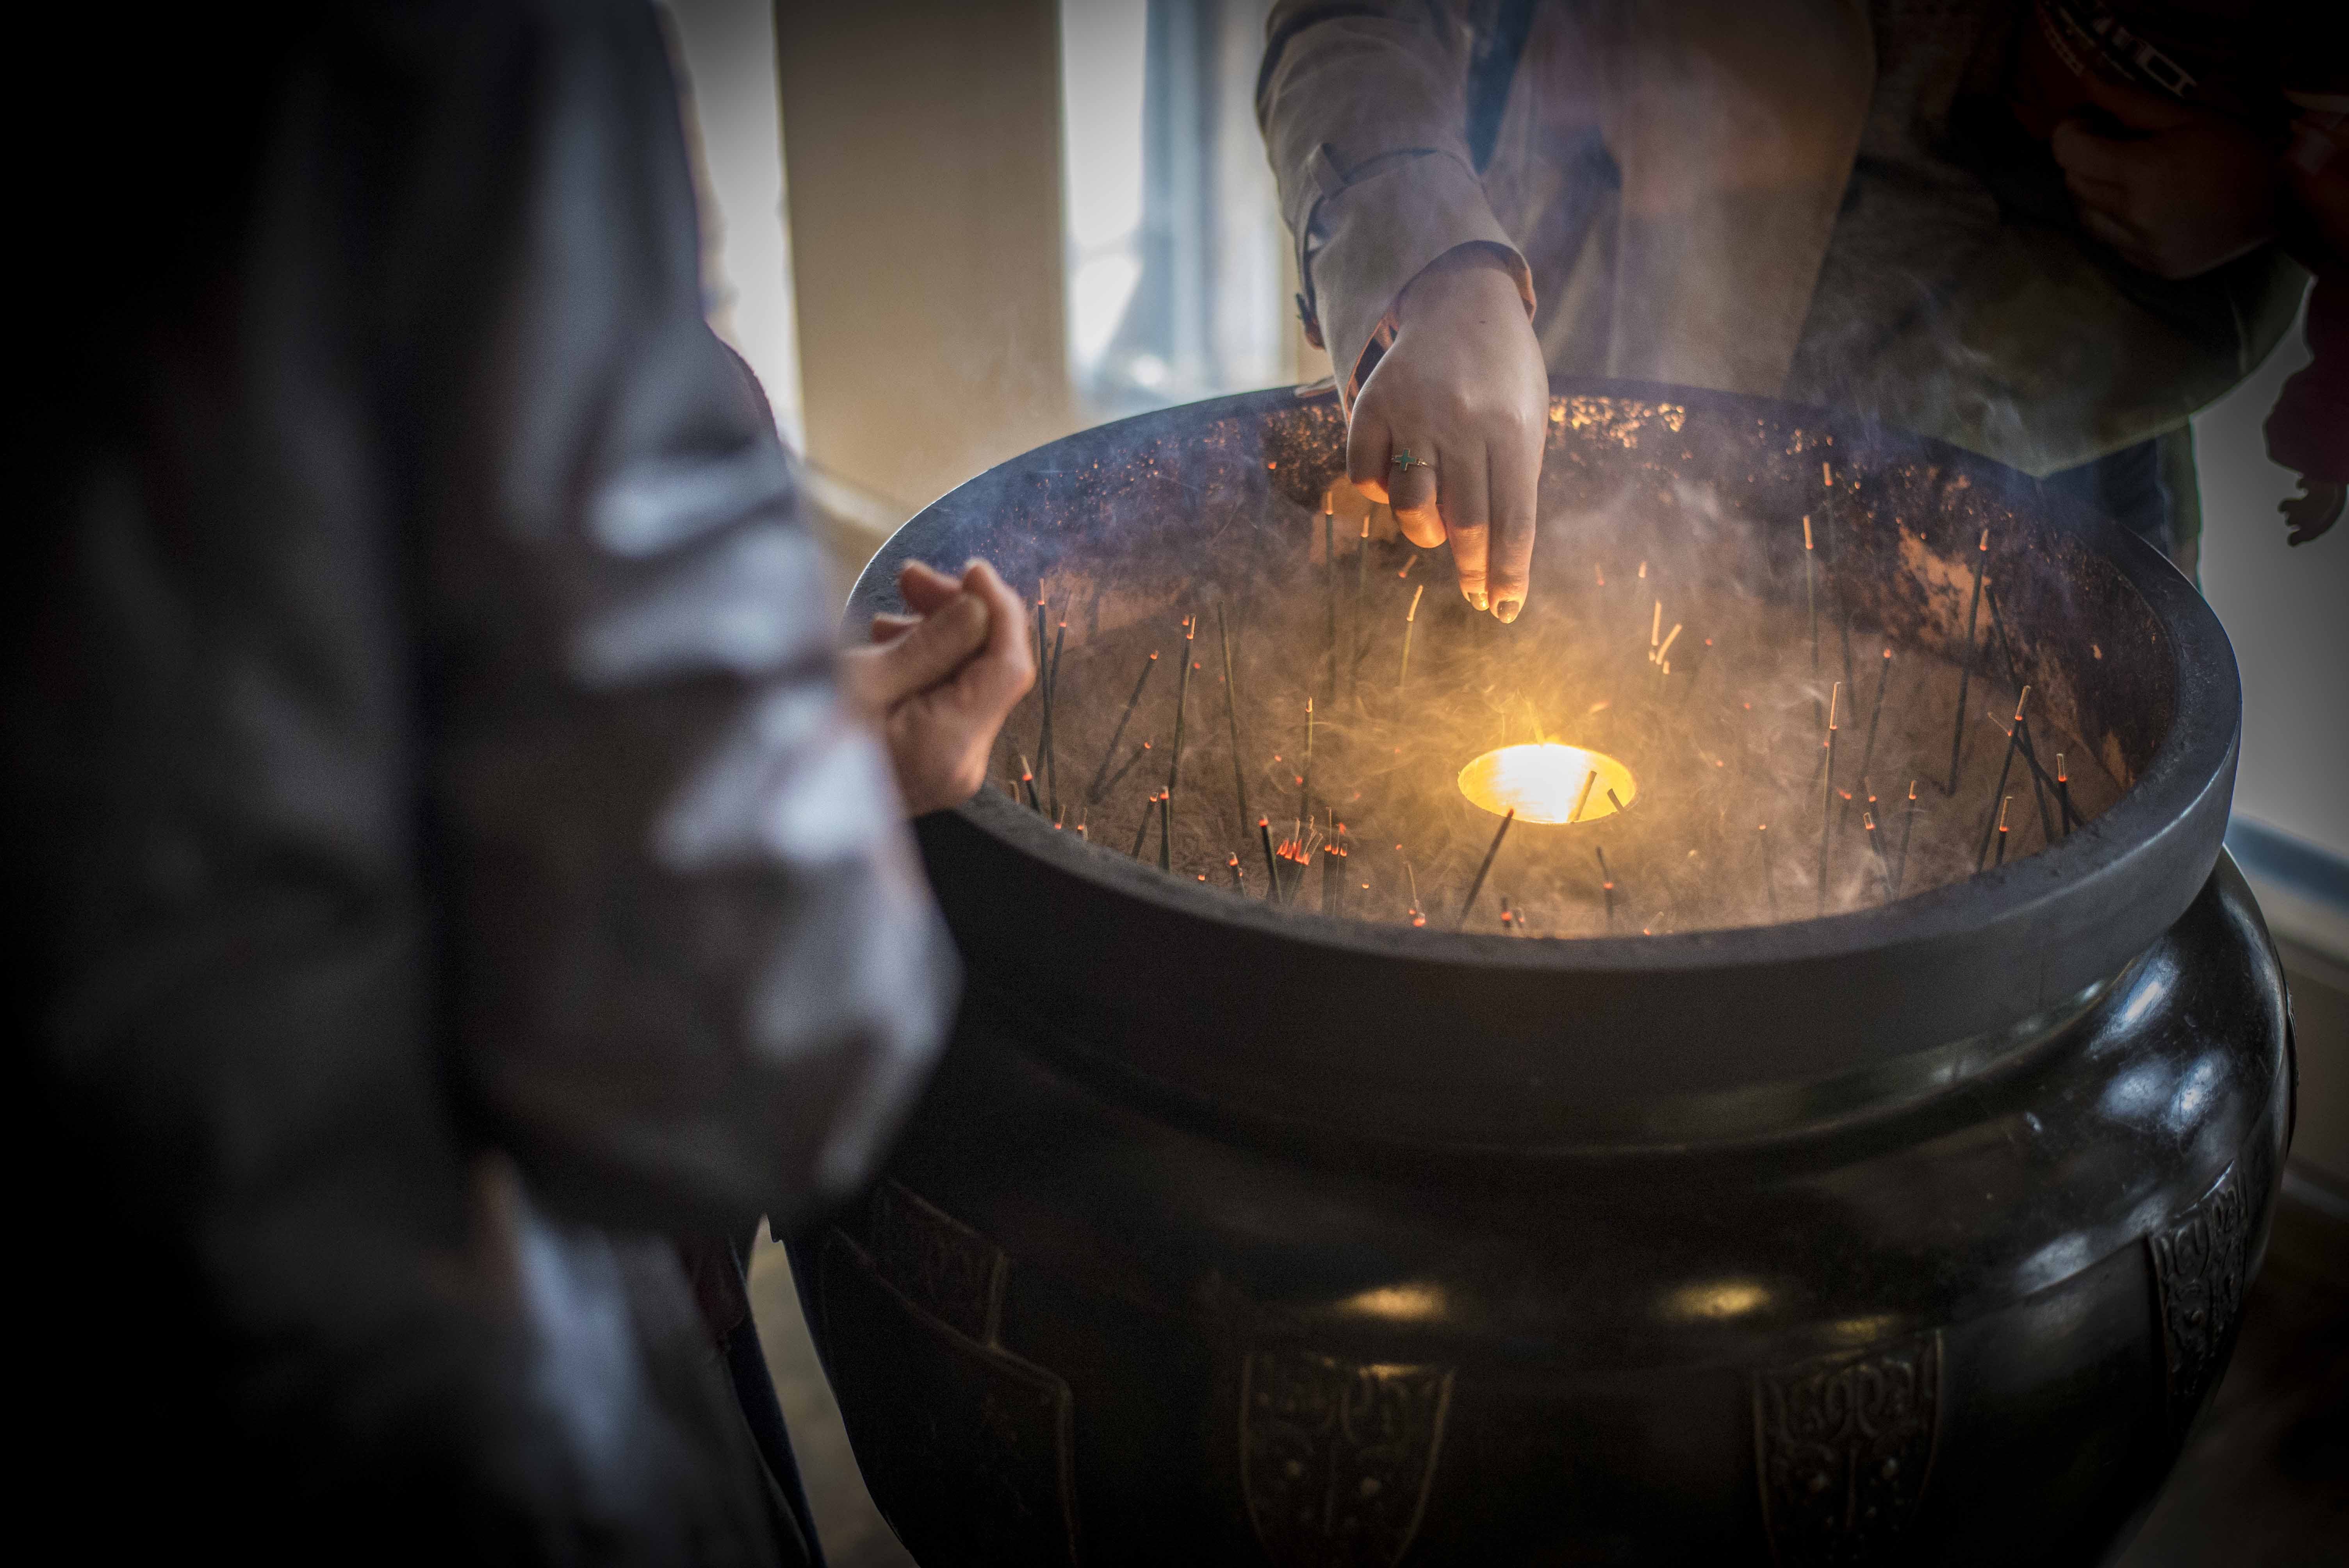 Devotees of Buddhism burn incense as an offering to the gods at Kiyomizu-dera temple.